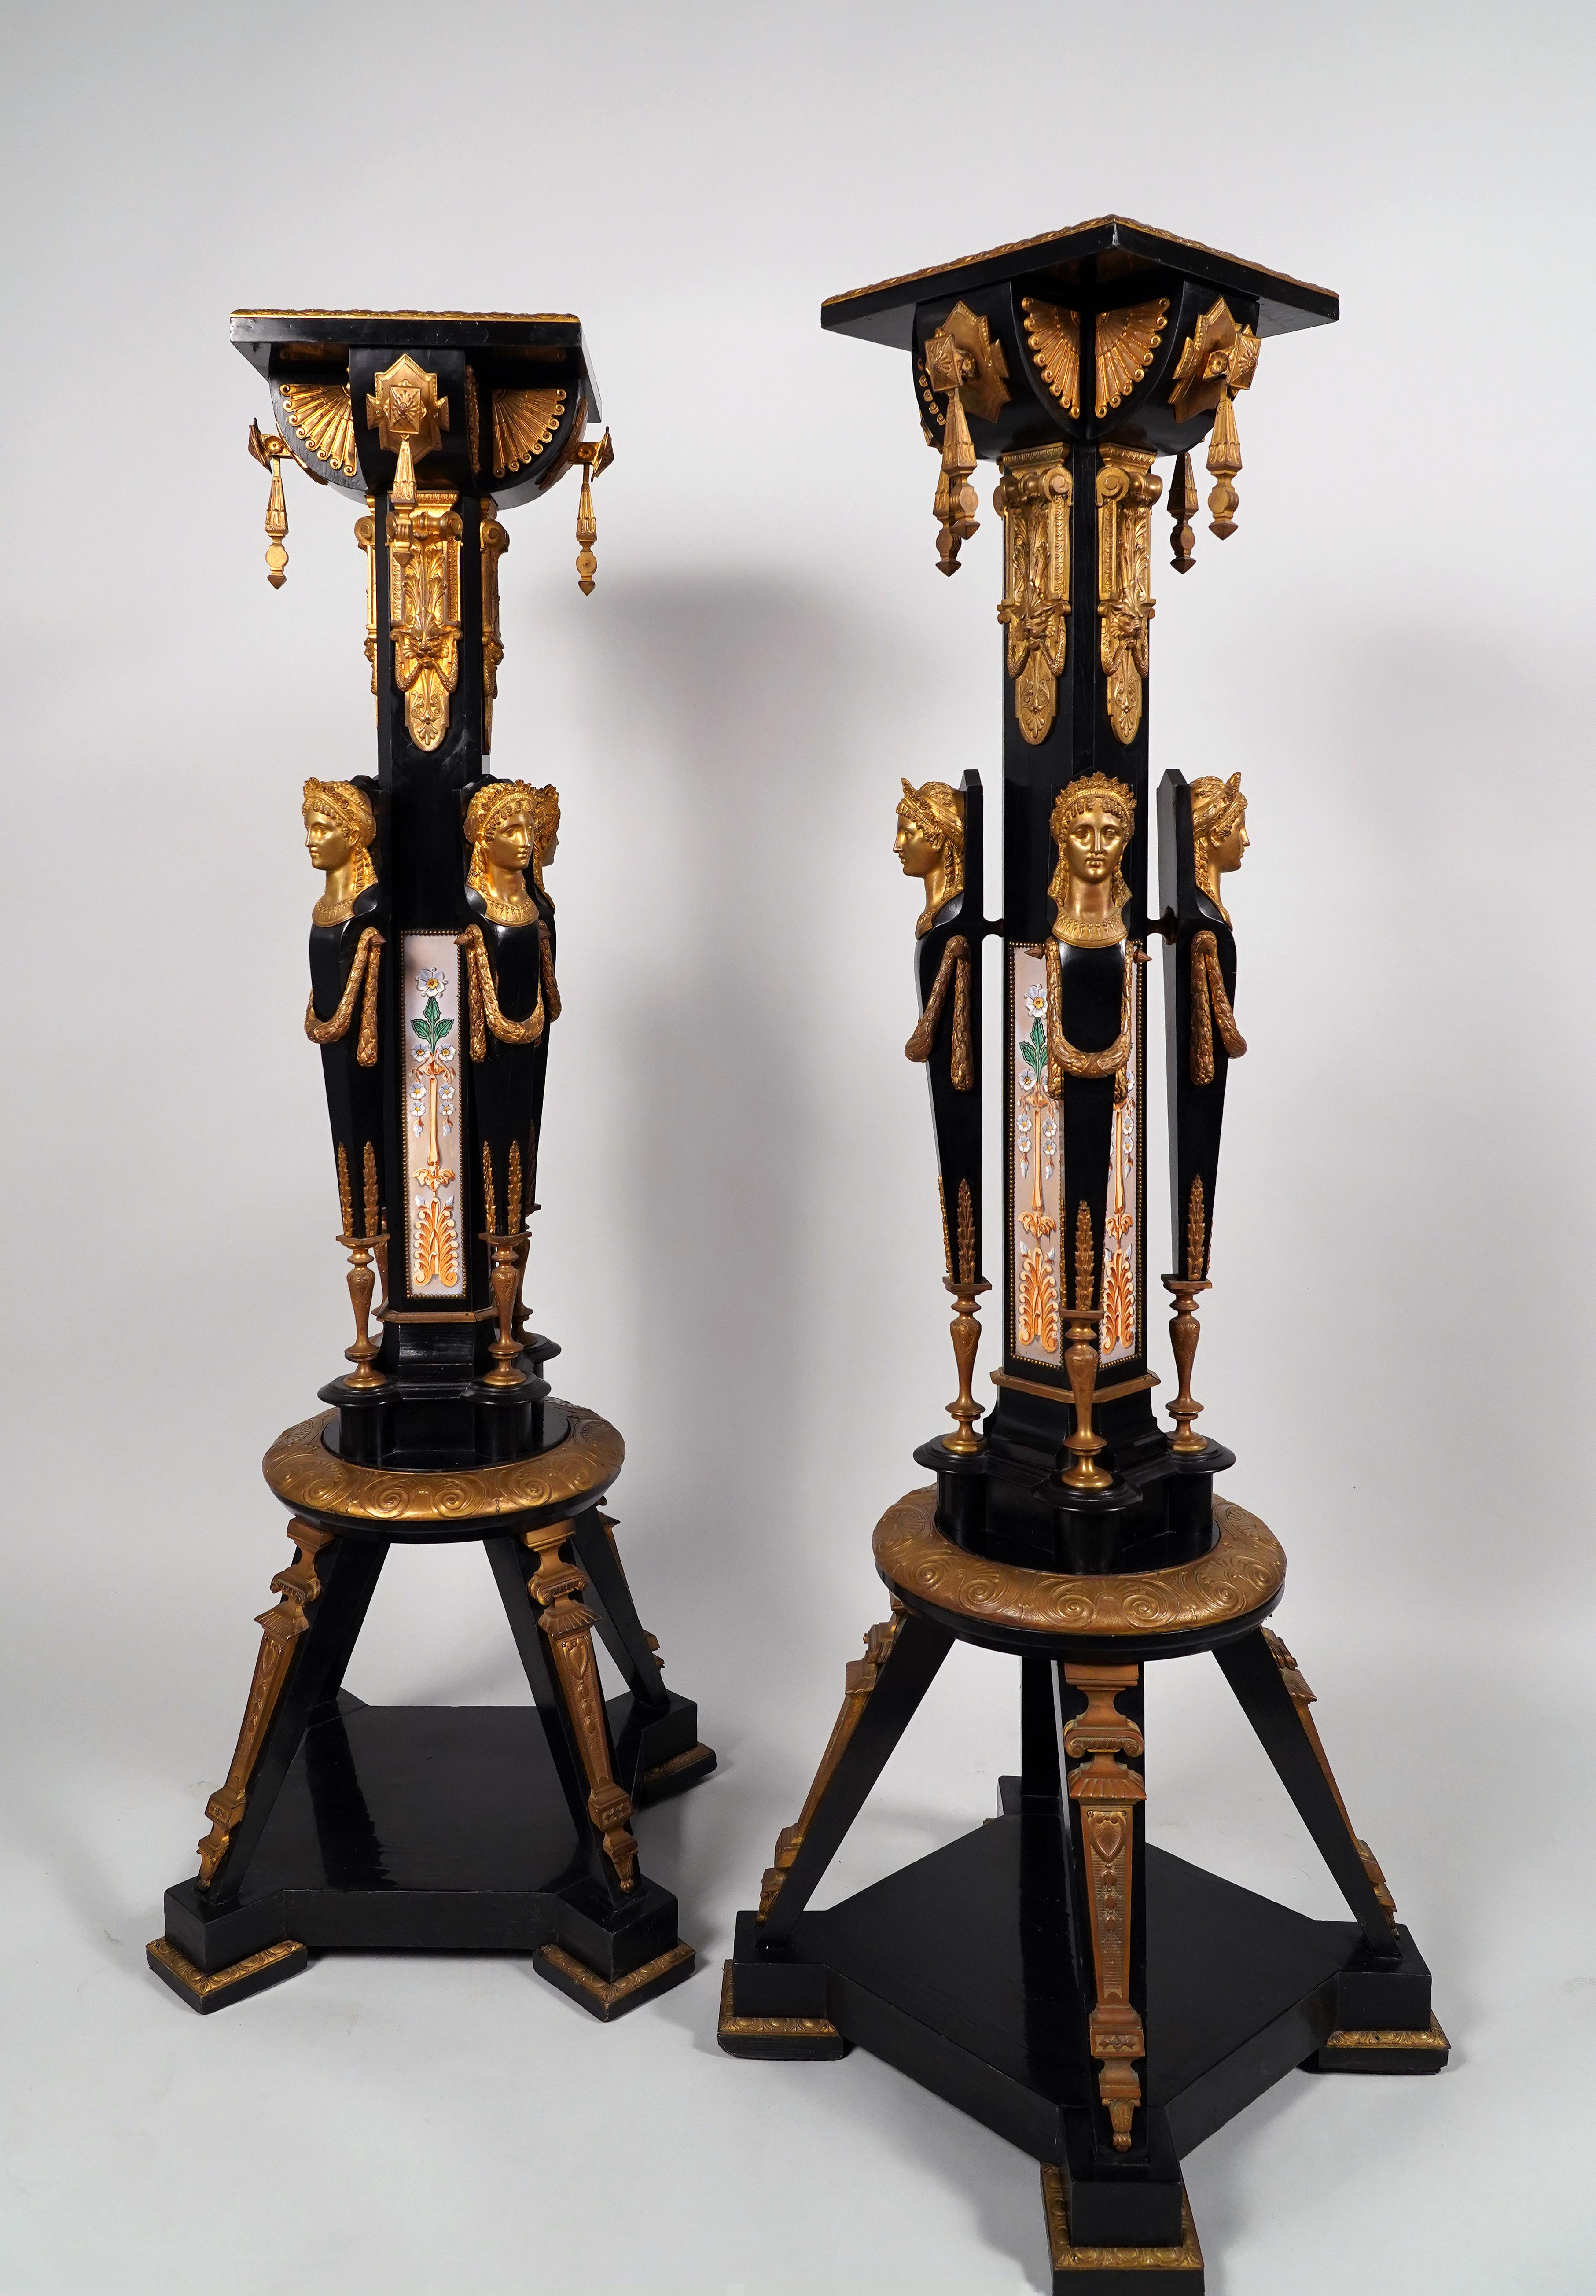 Exceptional pair of neo-Greek style pedestals, made in blackened pearwood, gilded galvanic bronze and glazed earthenware. The sheath-shaped shaft is decorated with rectangular plates in glazed earthenware with floral decoration and palmettes framed